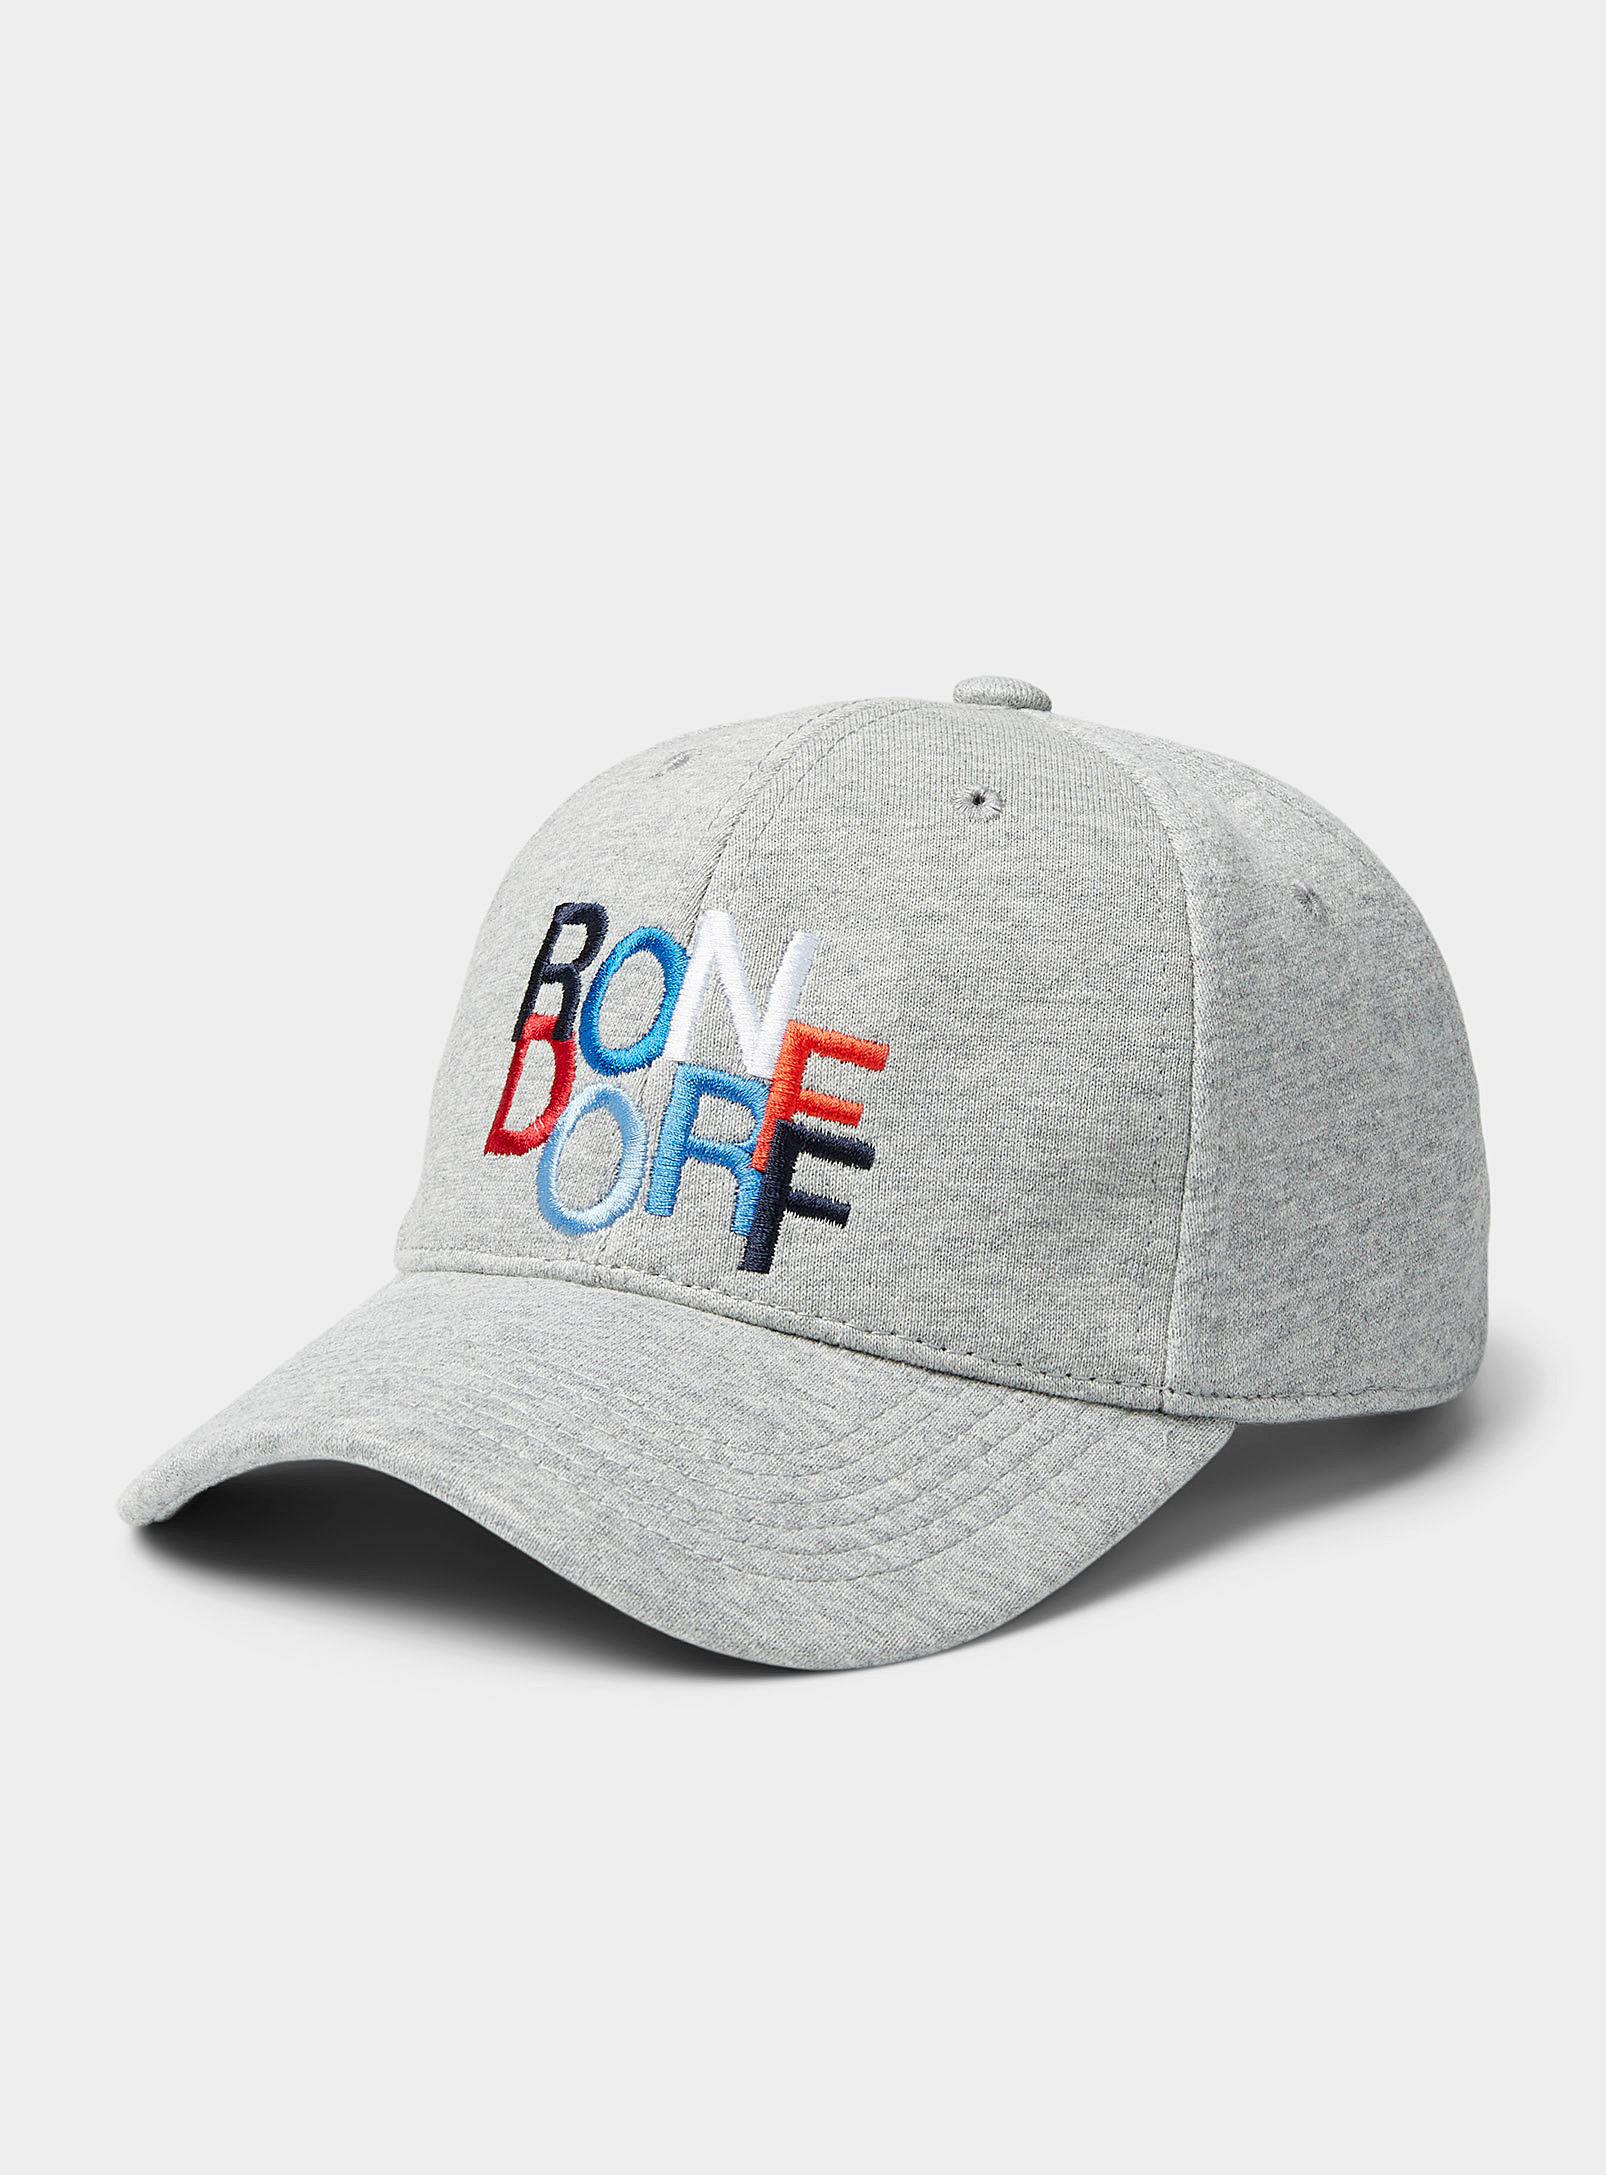 Ron Dorff Embroidered Signature Jersey Cap In Grey